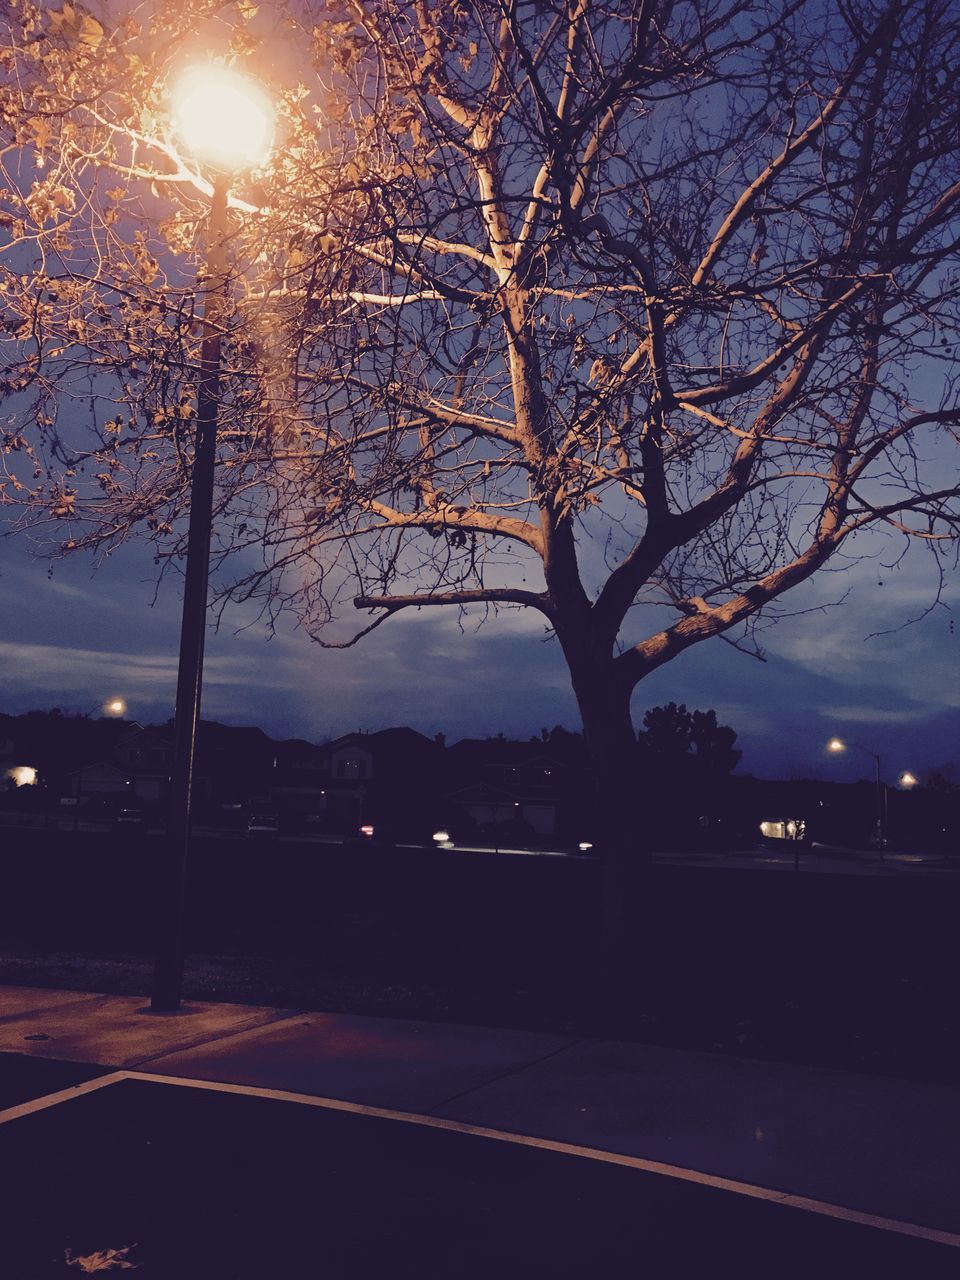 tree, bare tree, branch, silhouette, sky, street light, illuminated, night, tranquility, nature, dusk, lighting equipment, road, scenics, tranquil scene, beauty in nature, sunset, street, outdoors, no people